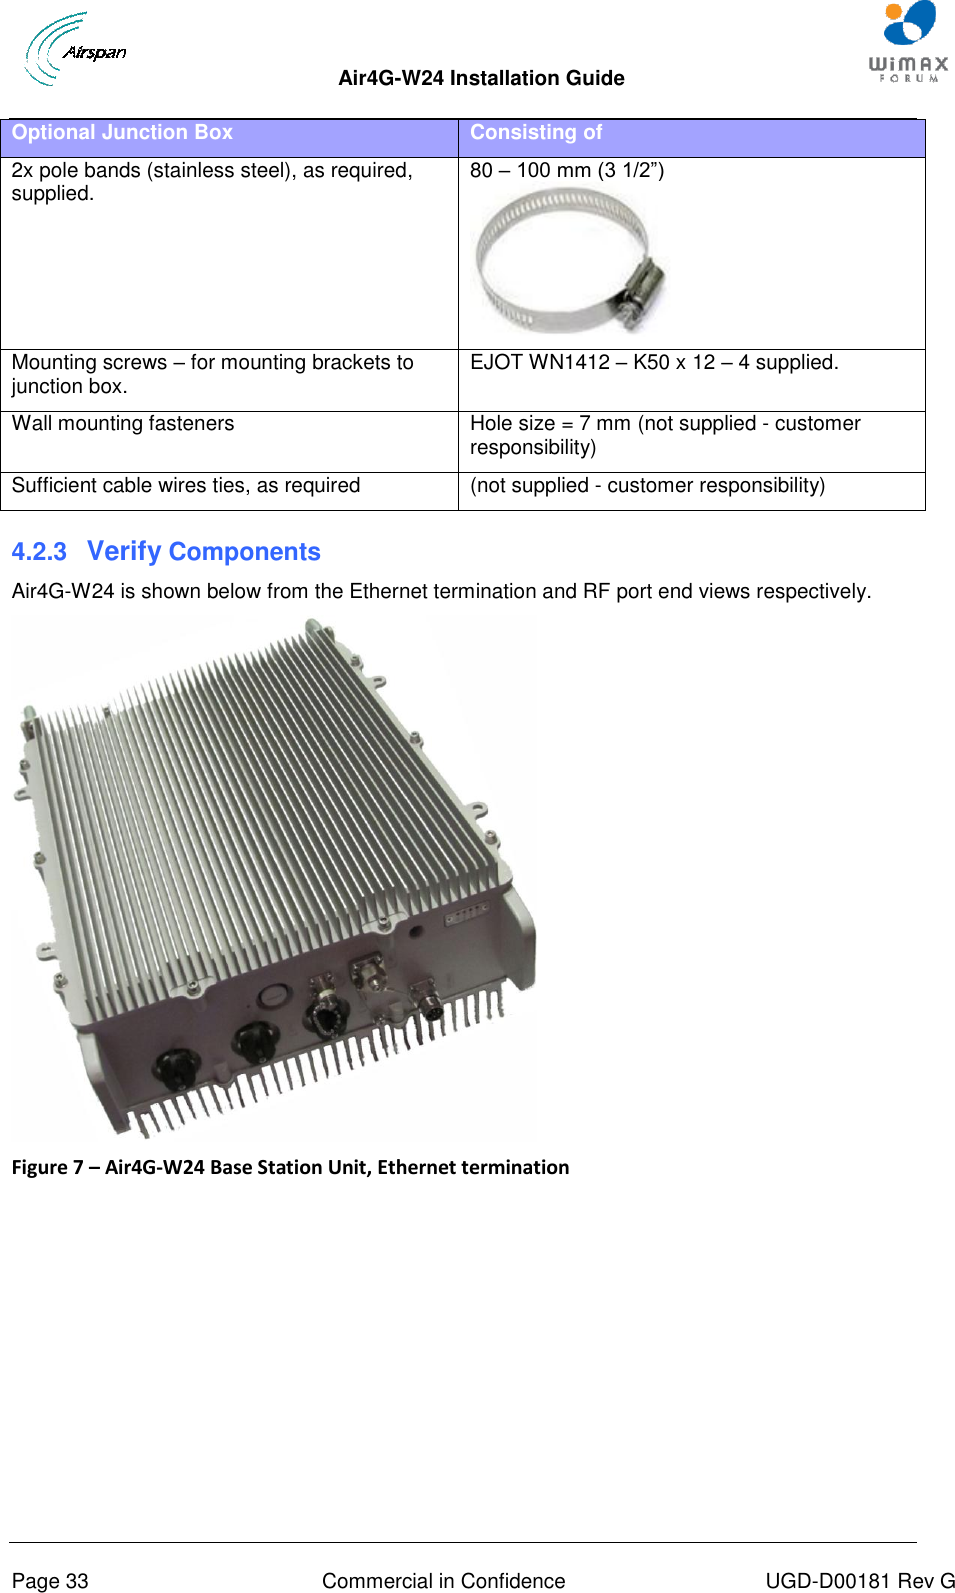  Air4G-W24 Installation Guide       Page 33  Commercial in Confidence  UGD-D00181 Rev G Optional Junction Box Consisting of 2x pole bands (stainless steel), as required, supplied. 80 – 100 mm (3 1/2”)  Mounting screws – for mounting brackets to junction box. EJOT WN1412 – K50 x 12 – 4 supplied. Wall mounting fasteners  Hole size = 7 mm (not supplied - customer responsibility) Sufficient cable wires ties, as required (not supplied - customer responsibility) 4.2.3  Verify Components Air4G-W24 is shown below from the Ethernet termination and RF port end views respectively.  Figure 7 – Air4G-W24 Base Station Unit, Ethernet termination  